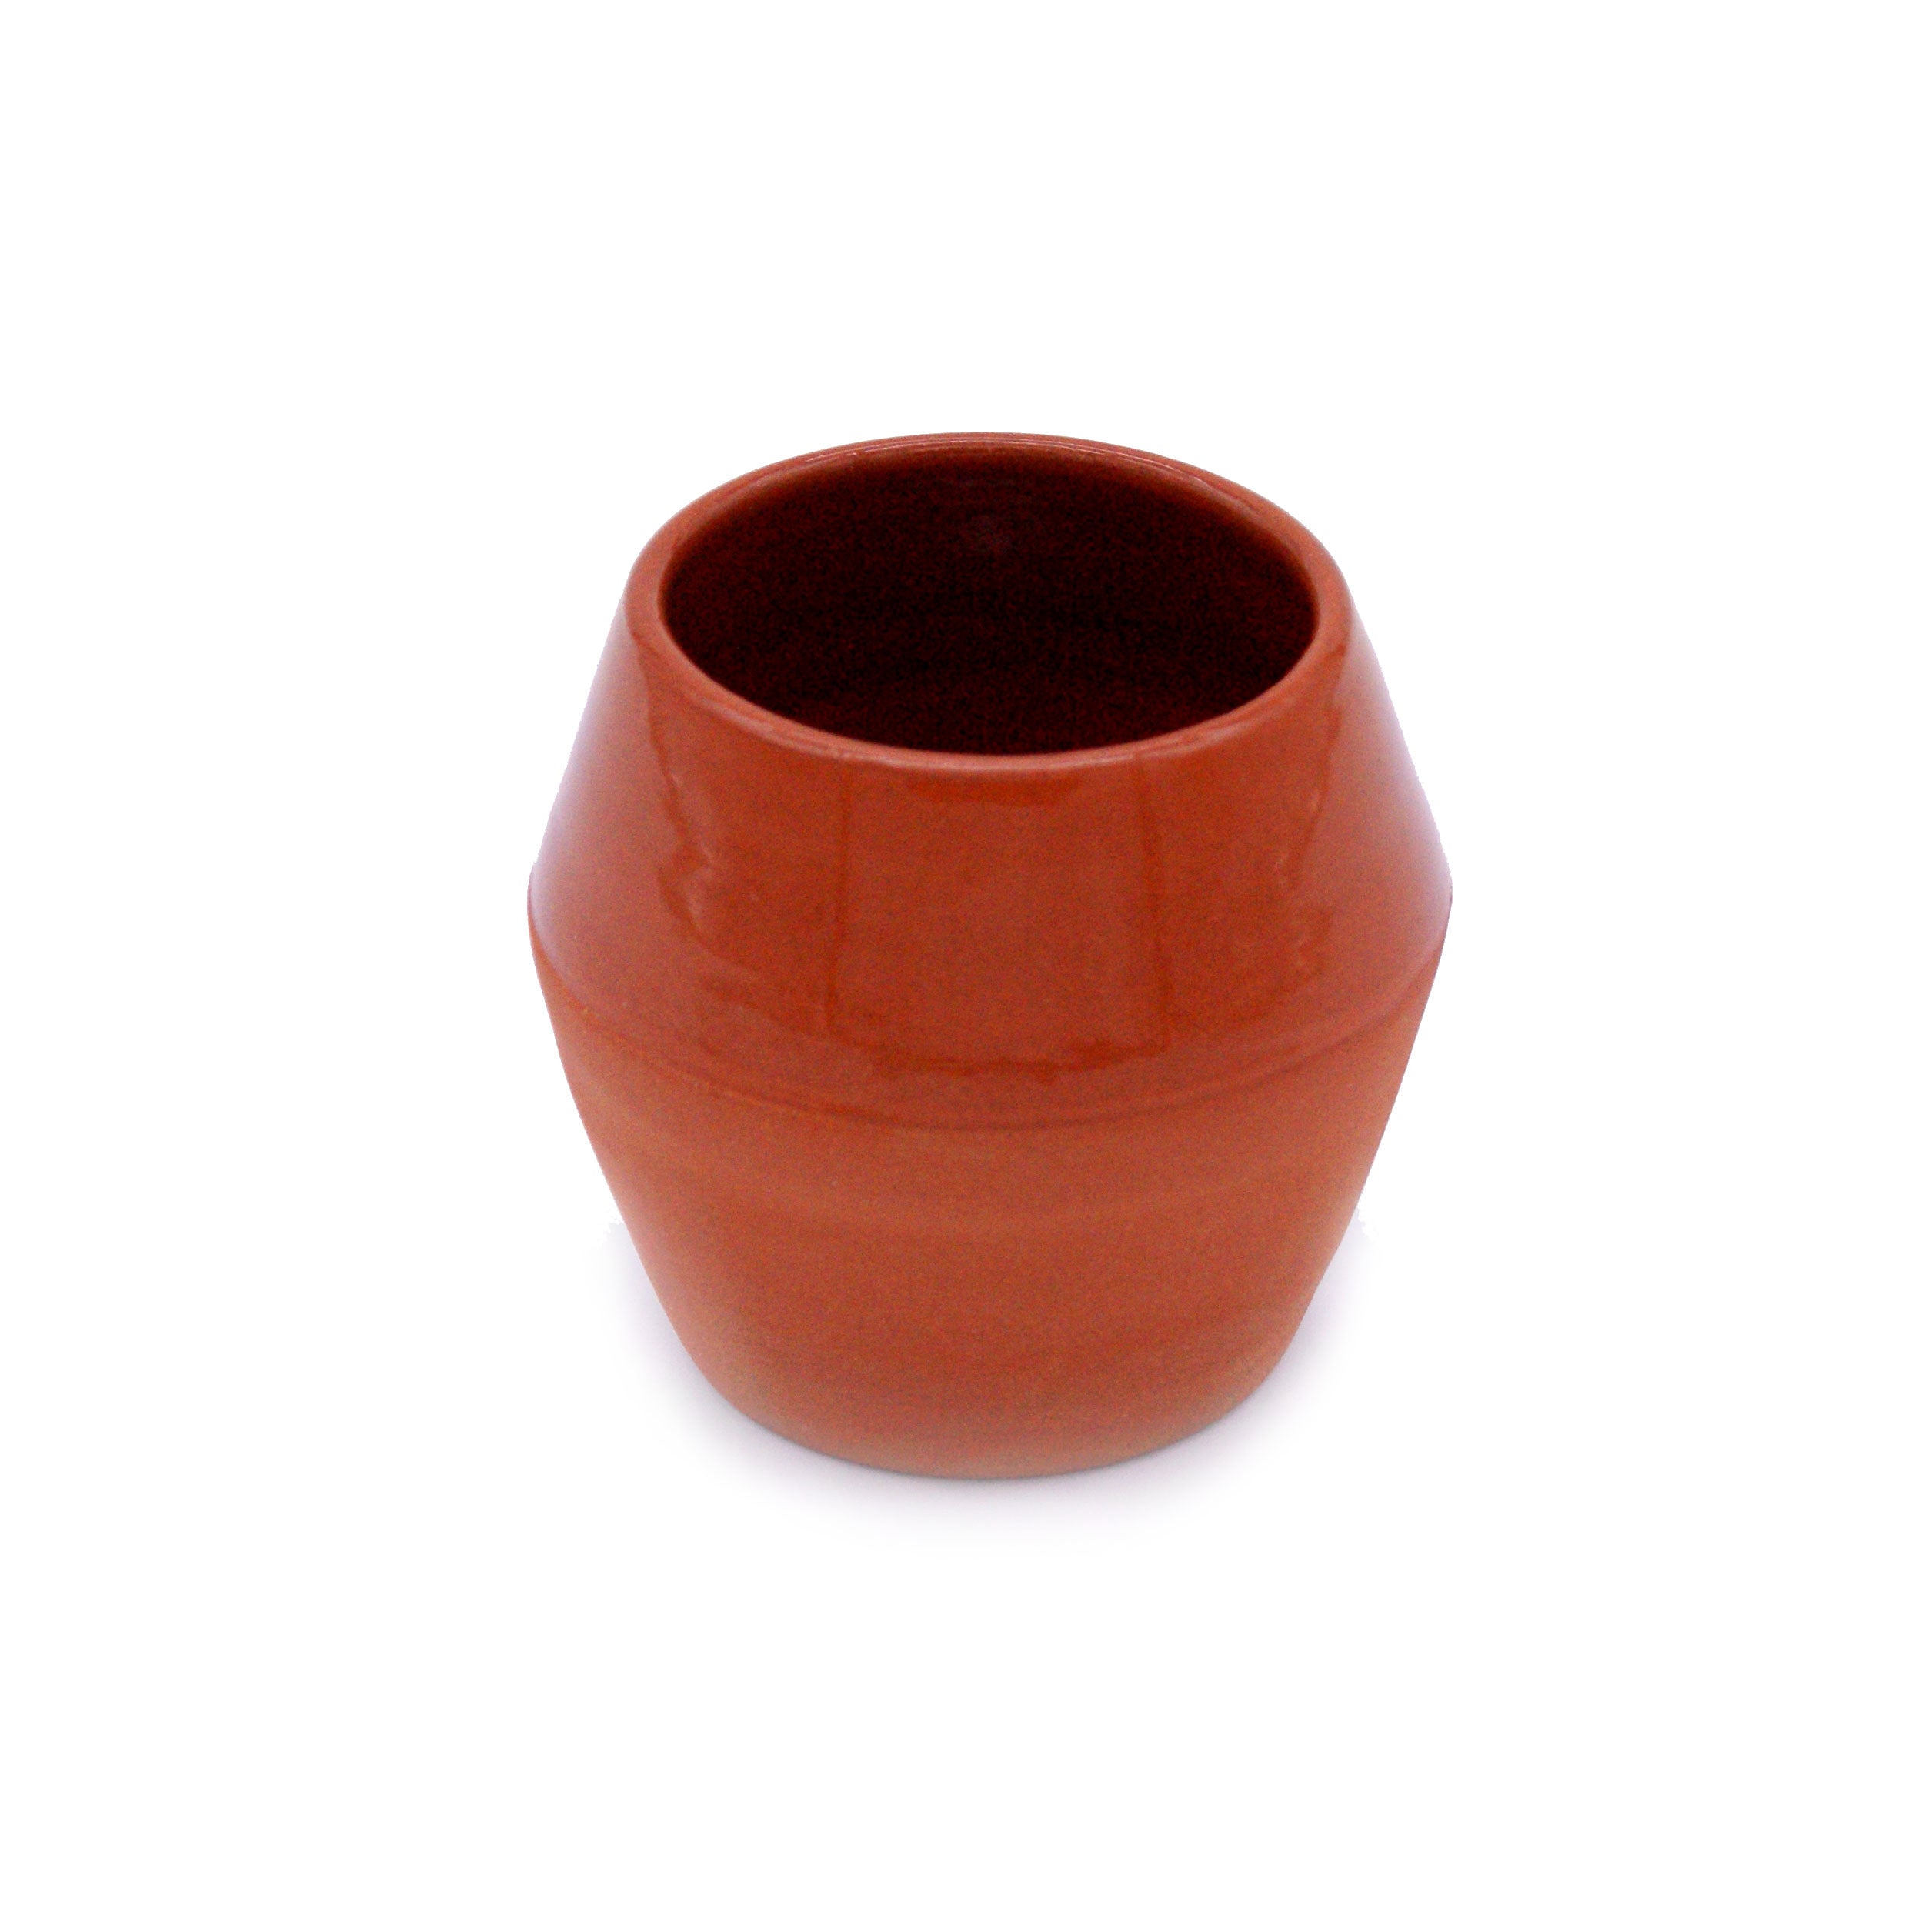 Perfect for water or wine, the traditional portuguese pottery cups will bring charm to your kitchen or table. 